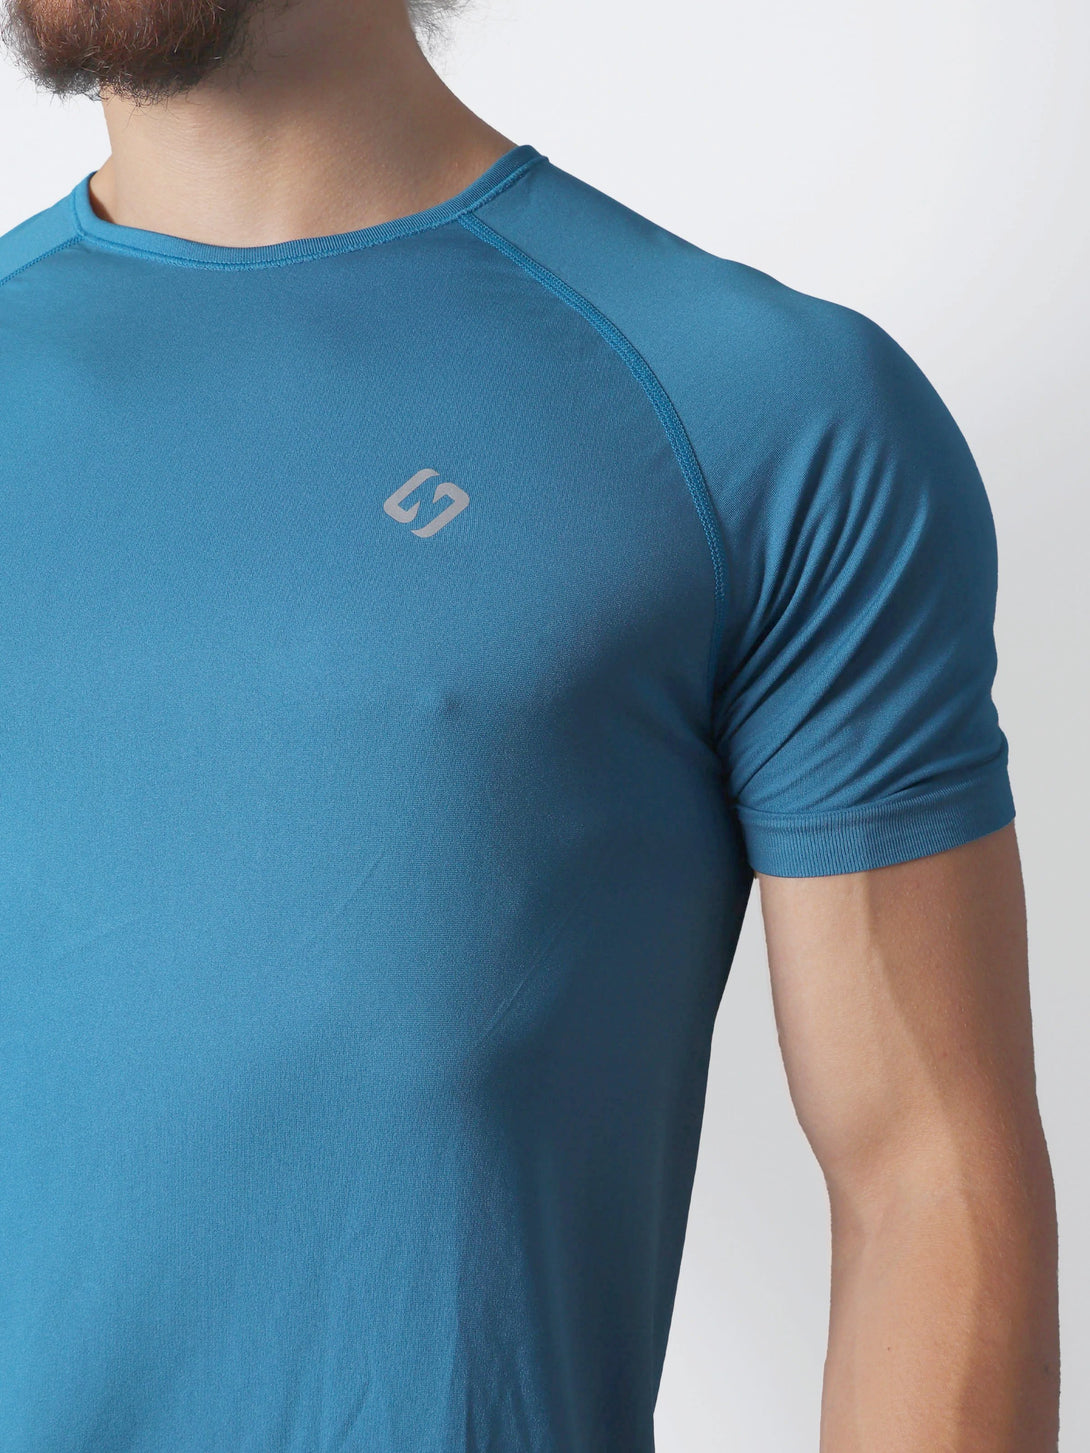 A Man Wearing Saxony Blue Color Seamless The Motion T-Shirt